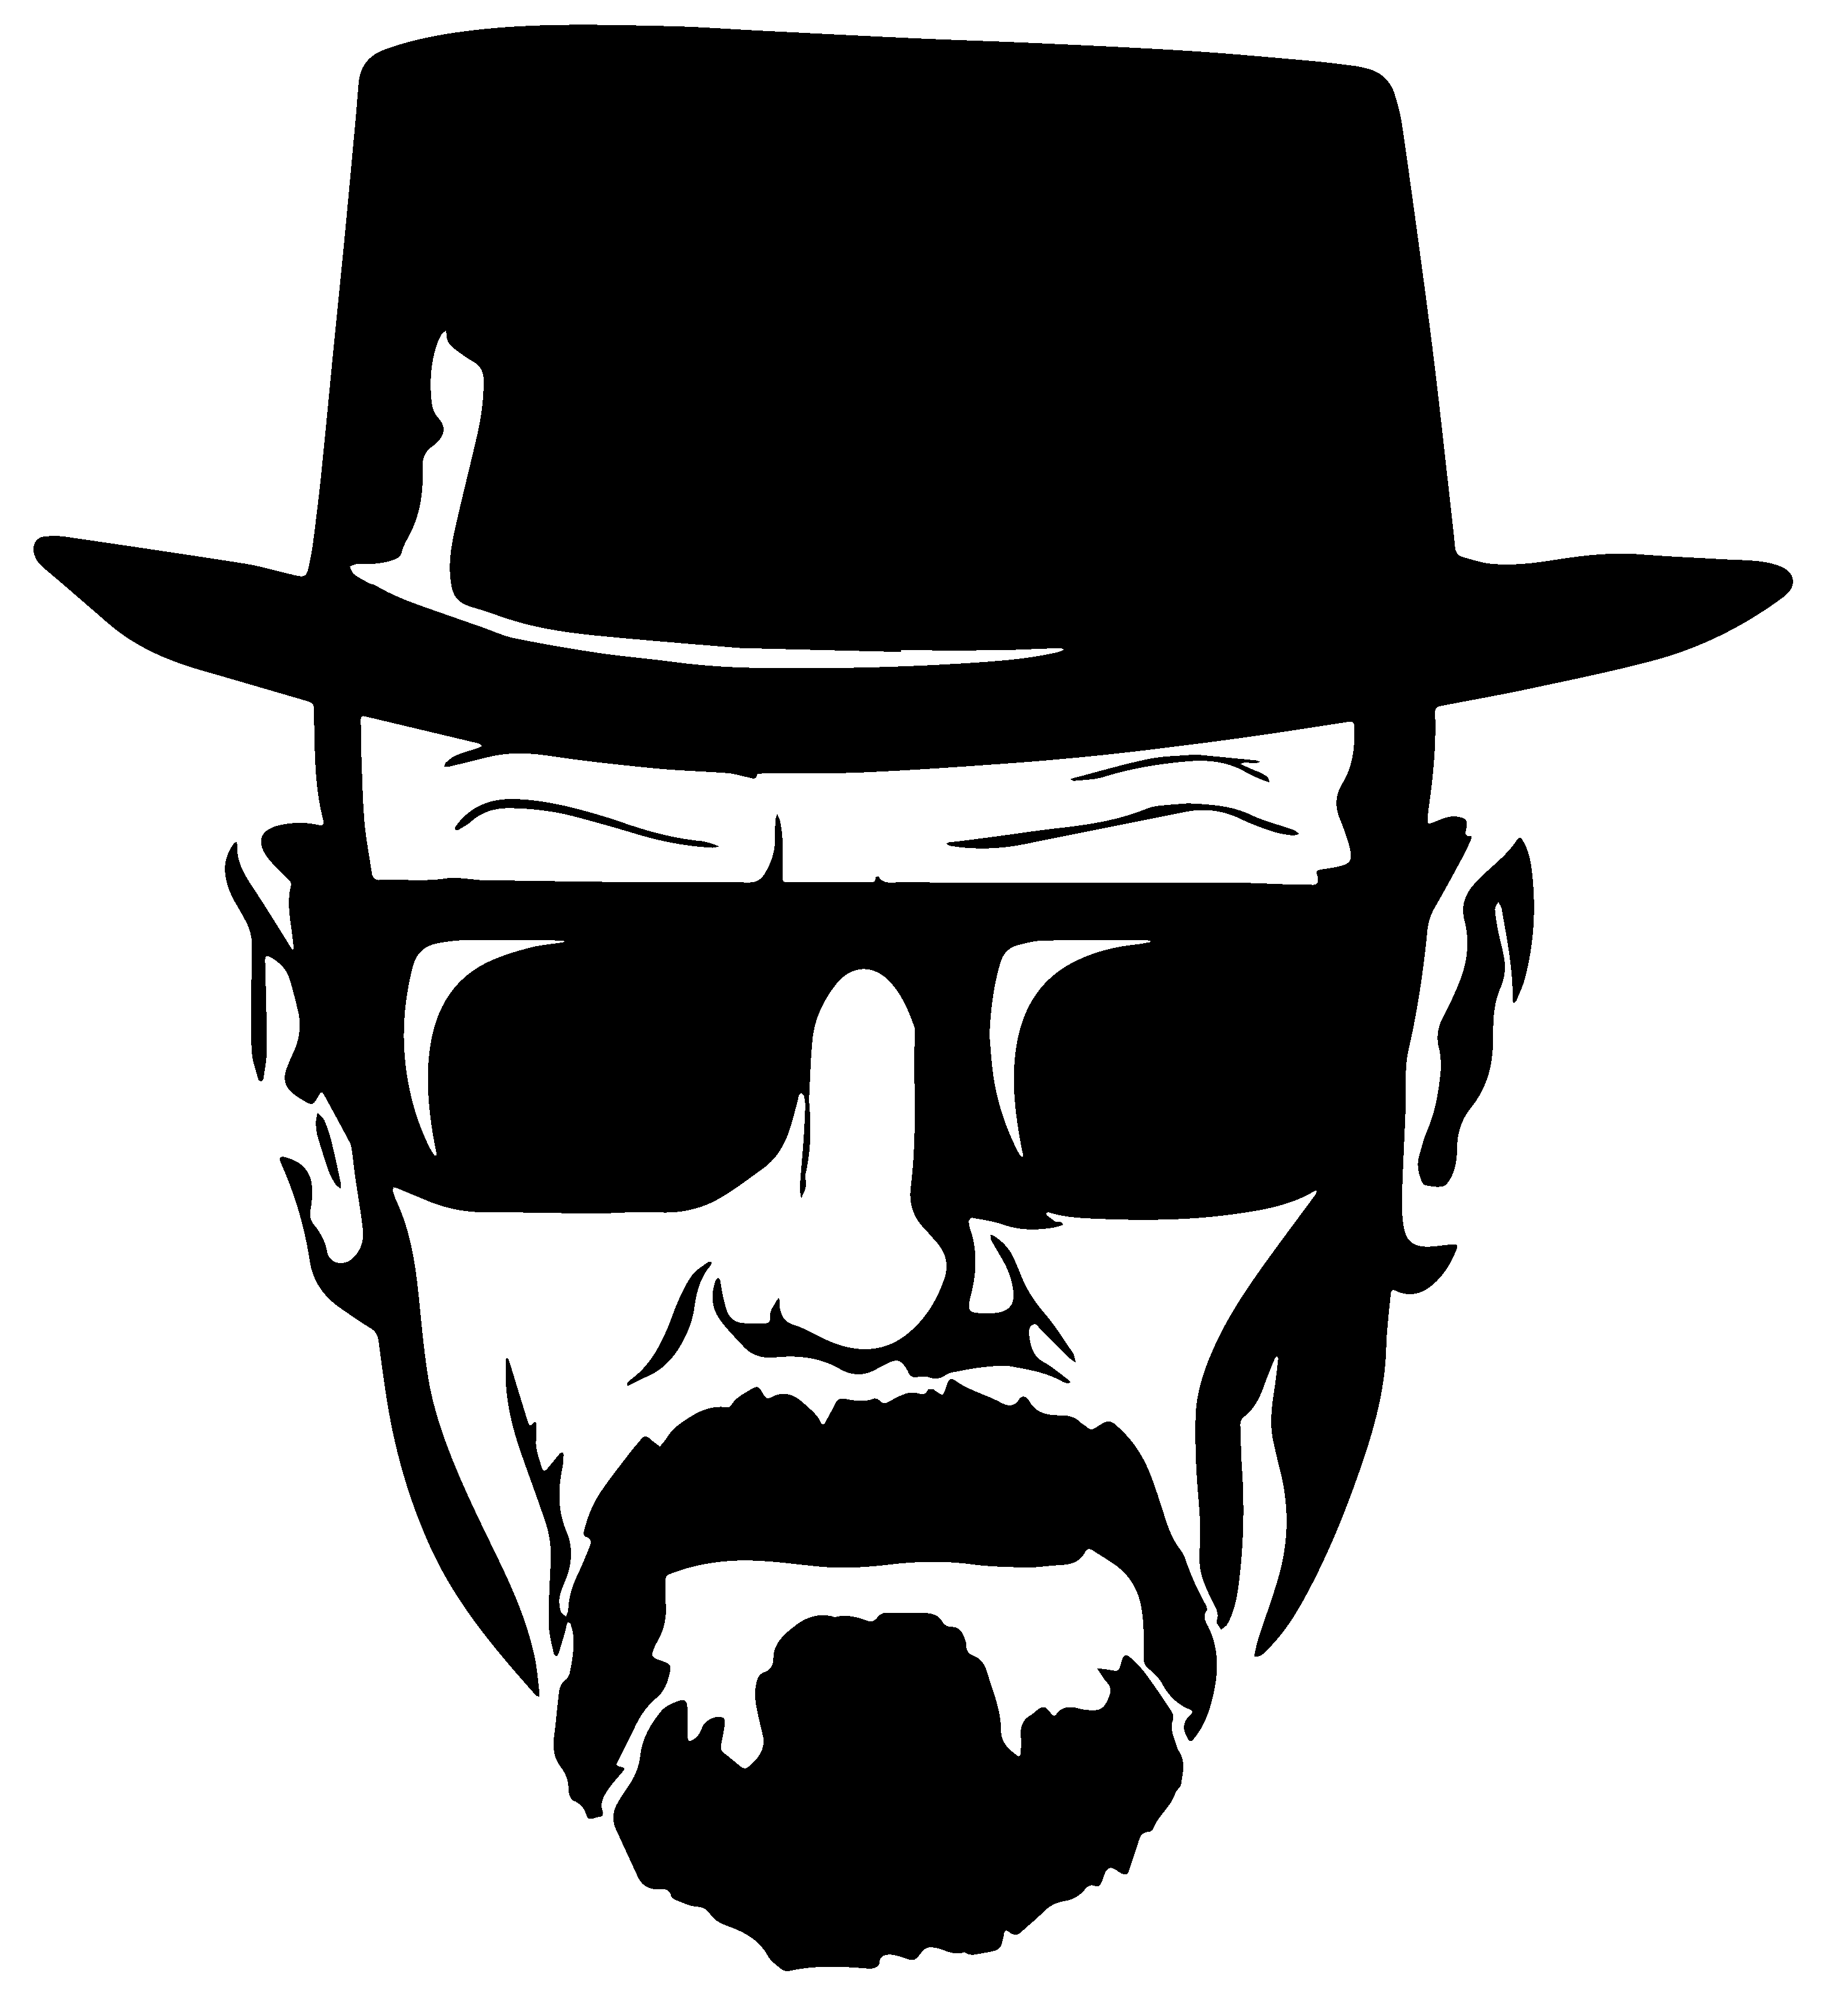 Walter White (Breaking Bad) Silhouette PNG Images